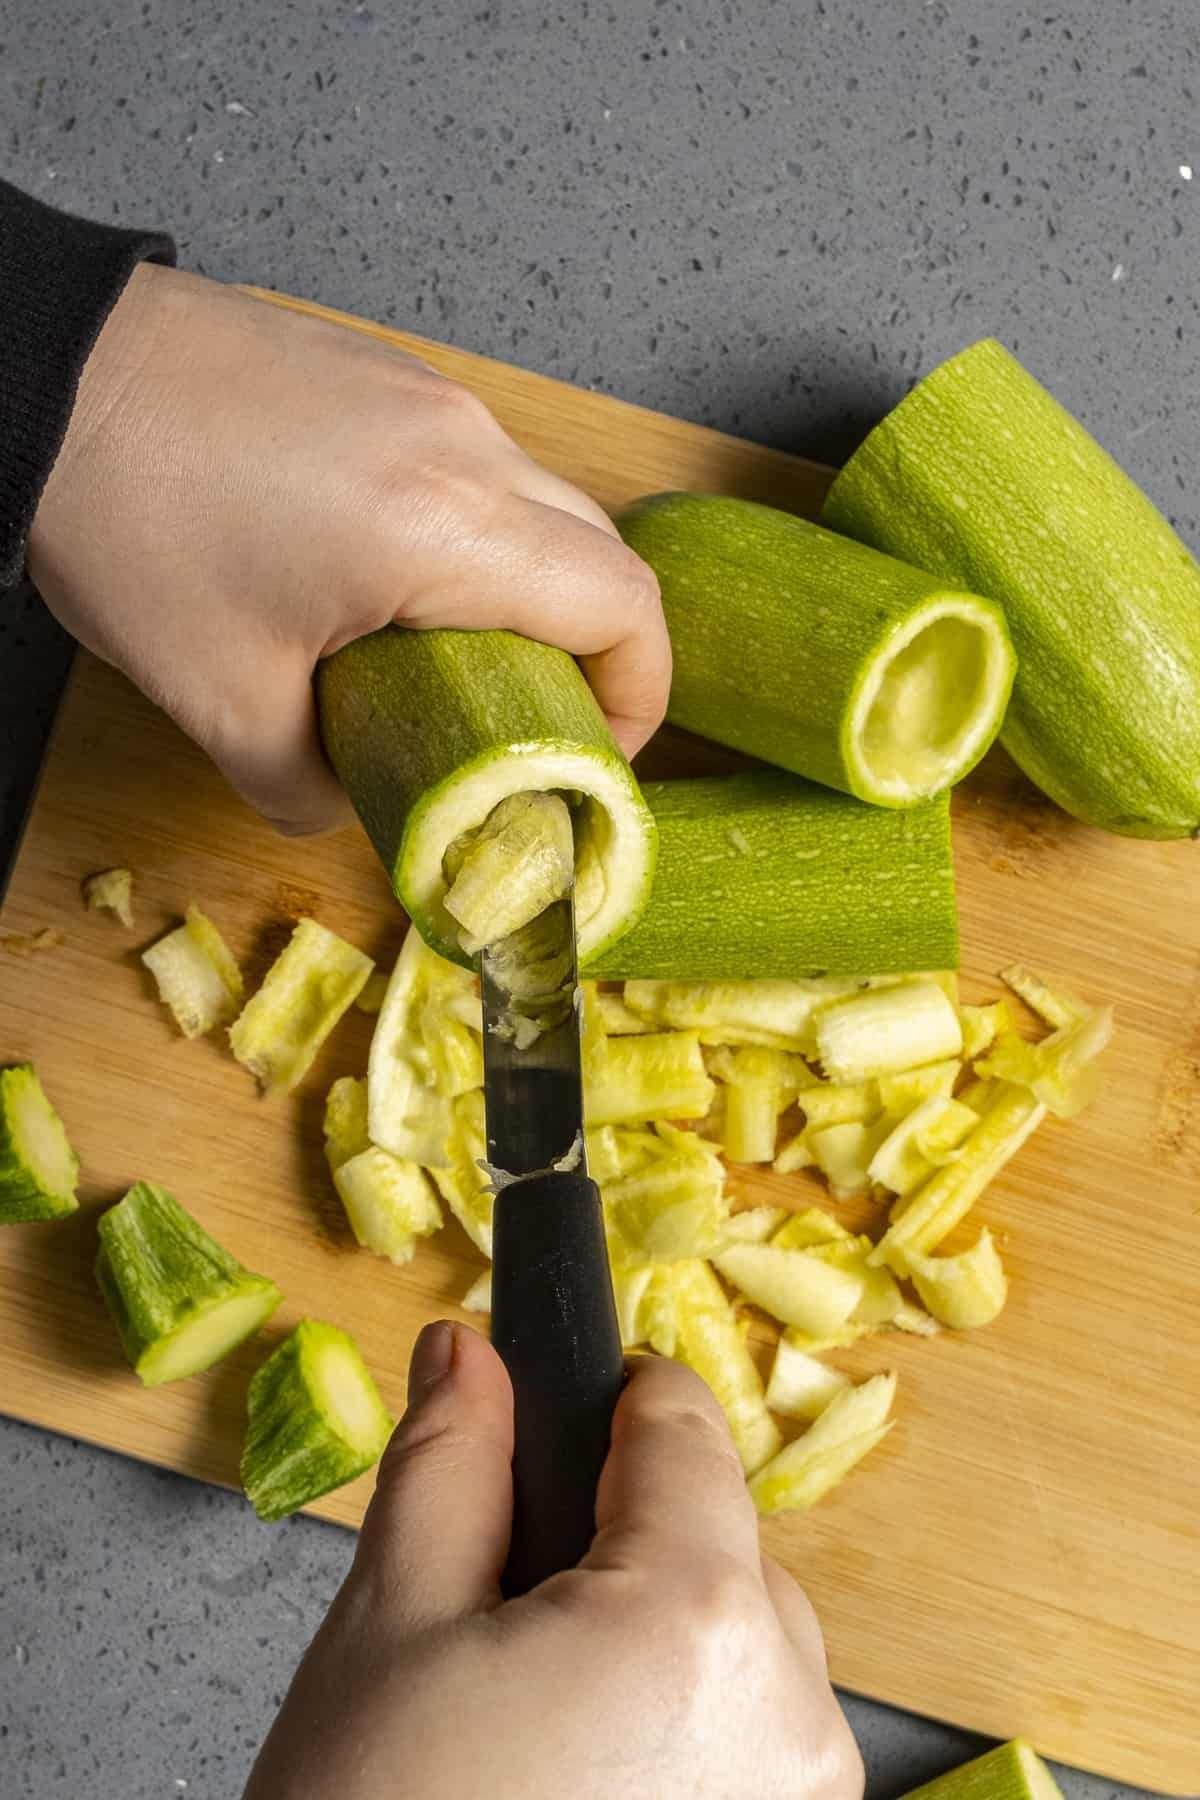 Zucchini being cored with a corer.